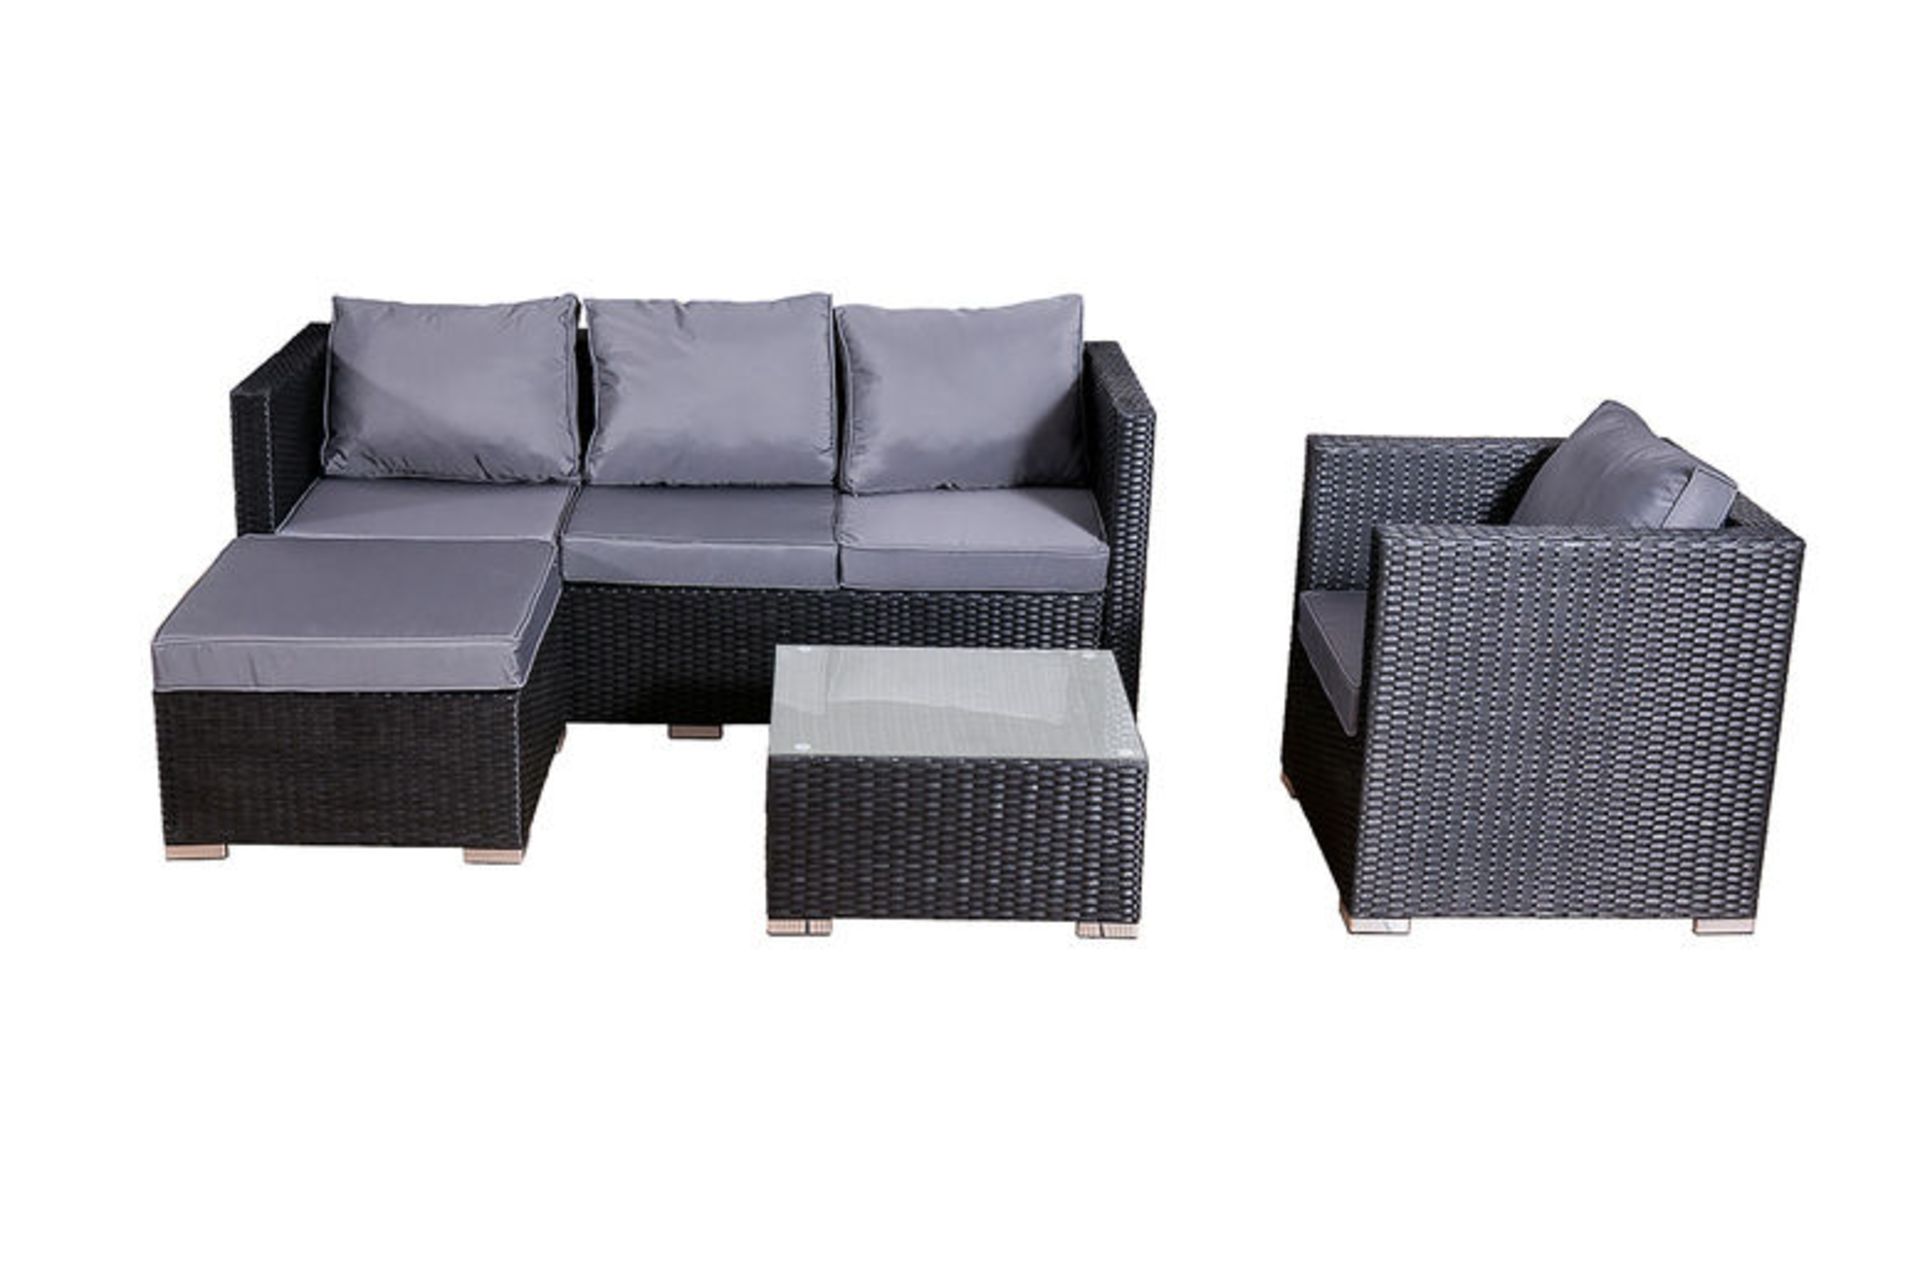 TRUCKLOAD OF 32 BRAND NEW 5 SEATER RATTAN GARDEN SETS MIX OF BLACK GREY BROWN - Image 3 of 3